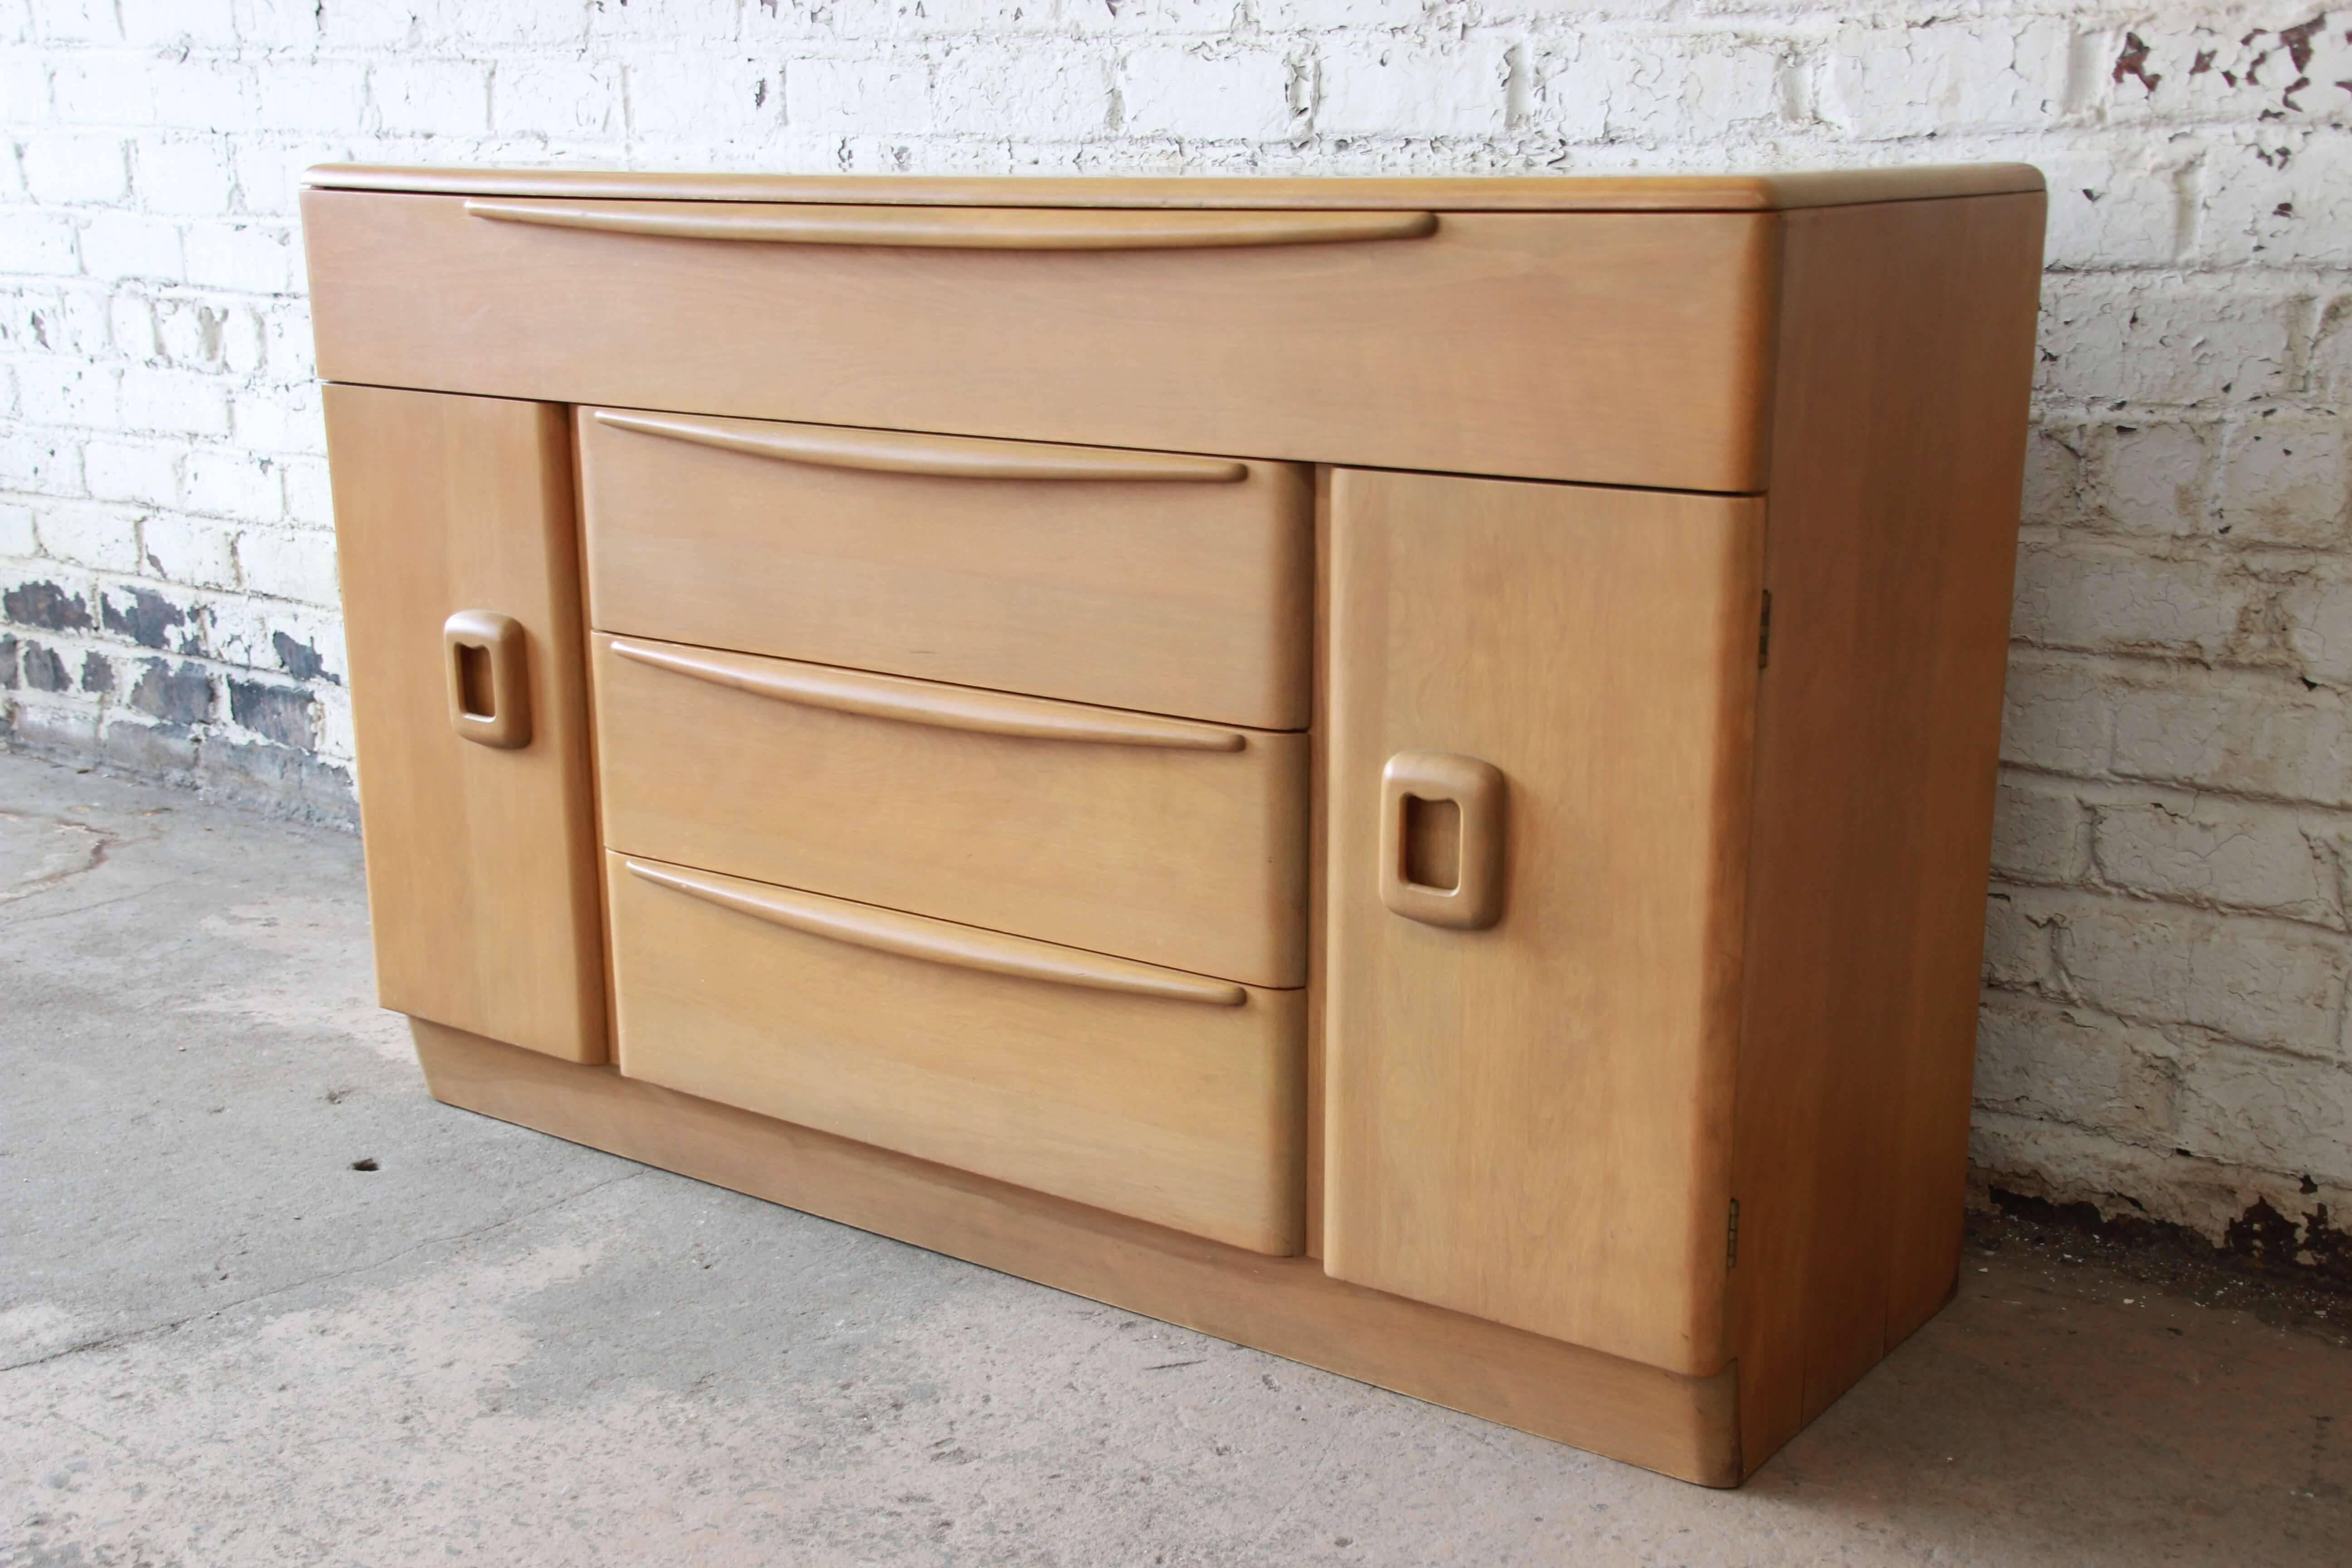 Offering a very nice and rare Heywood-Wakefield Mid-Century Modern sideboard credenza. This piece is in the 